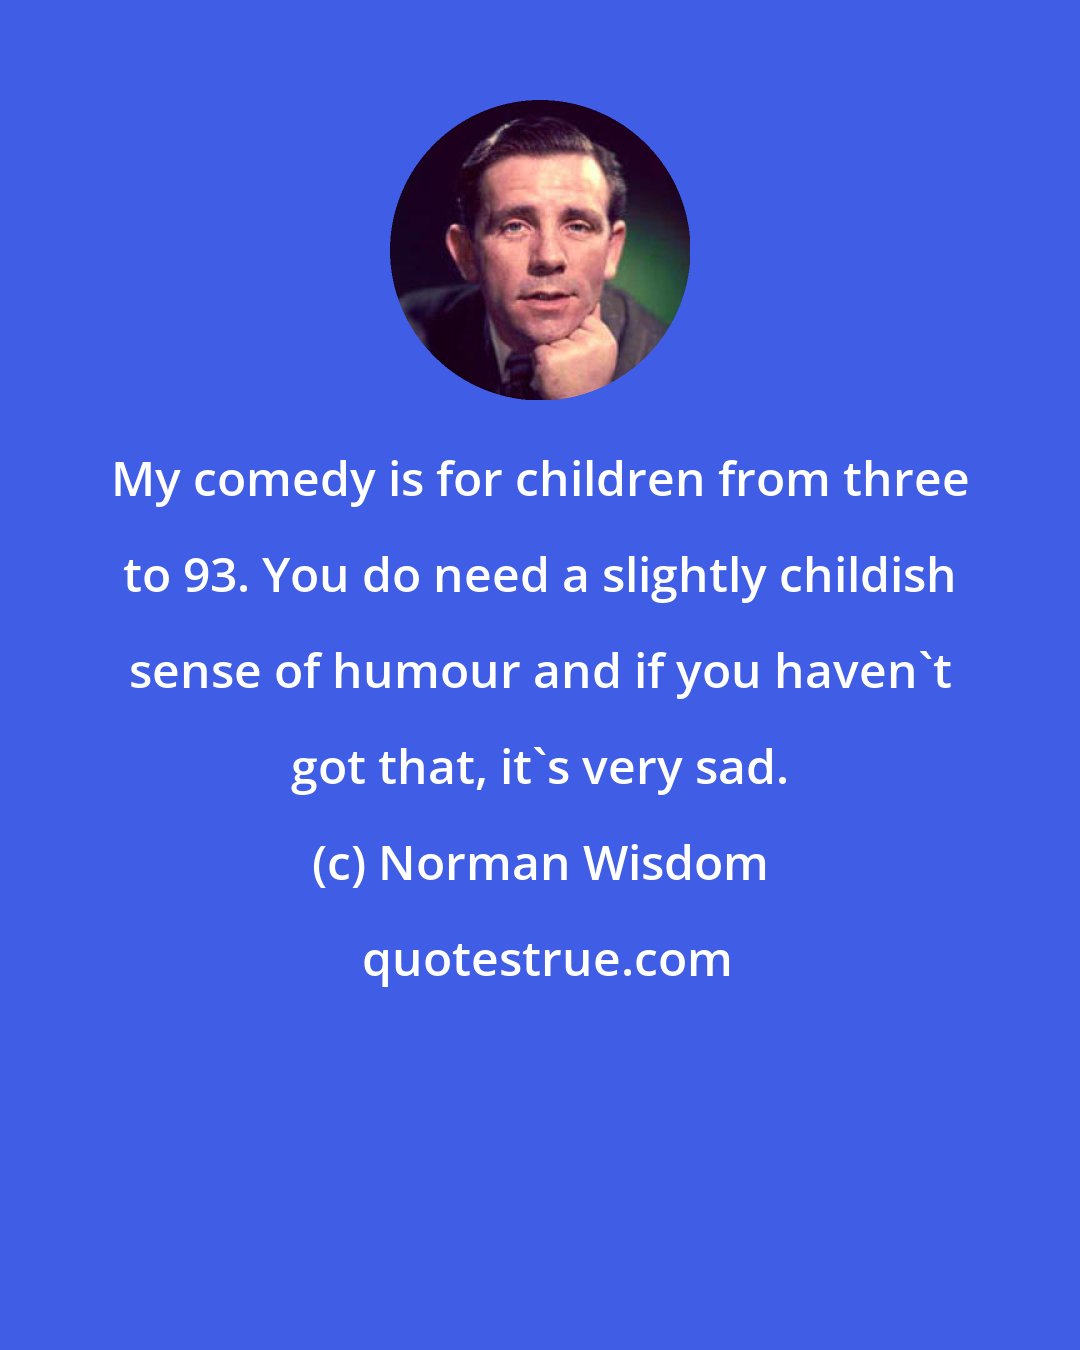 Norman Wisdom: My comedy is for children from three to 93. You do need a slightly childish sense of humour and if you haven't got that, it's very sad.